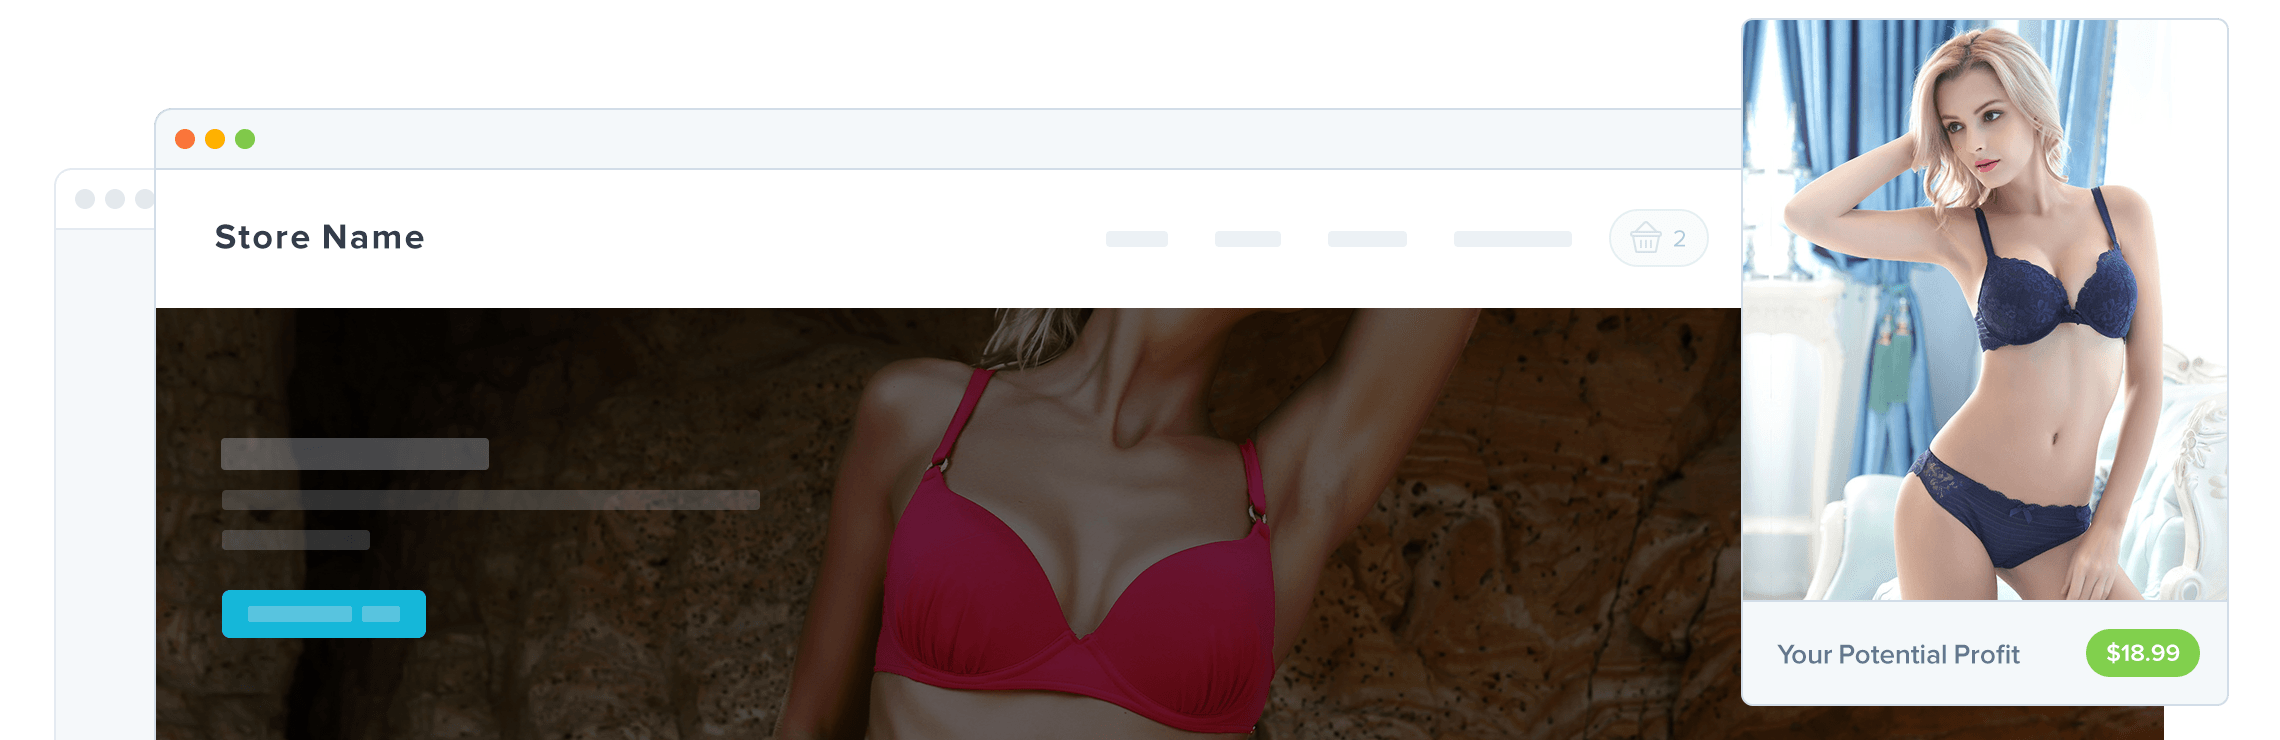 Find Best Bras Suppliers to Sell Online - Start Dropshipping!